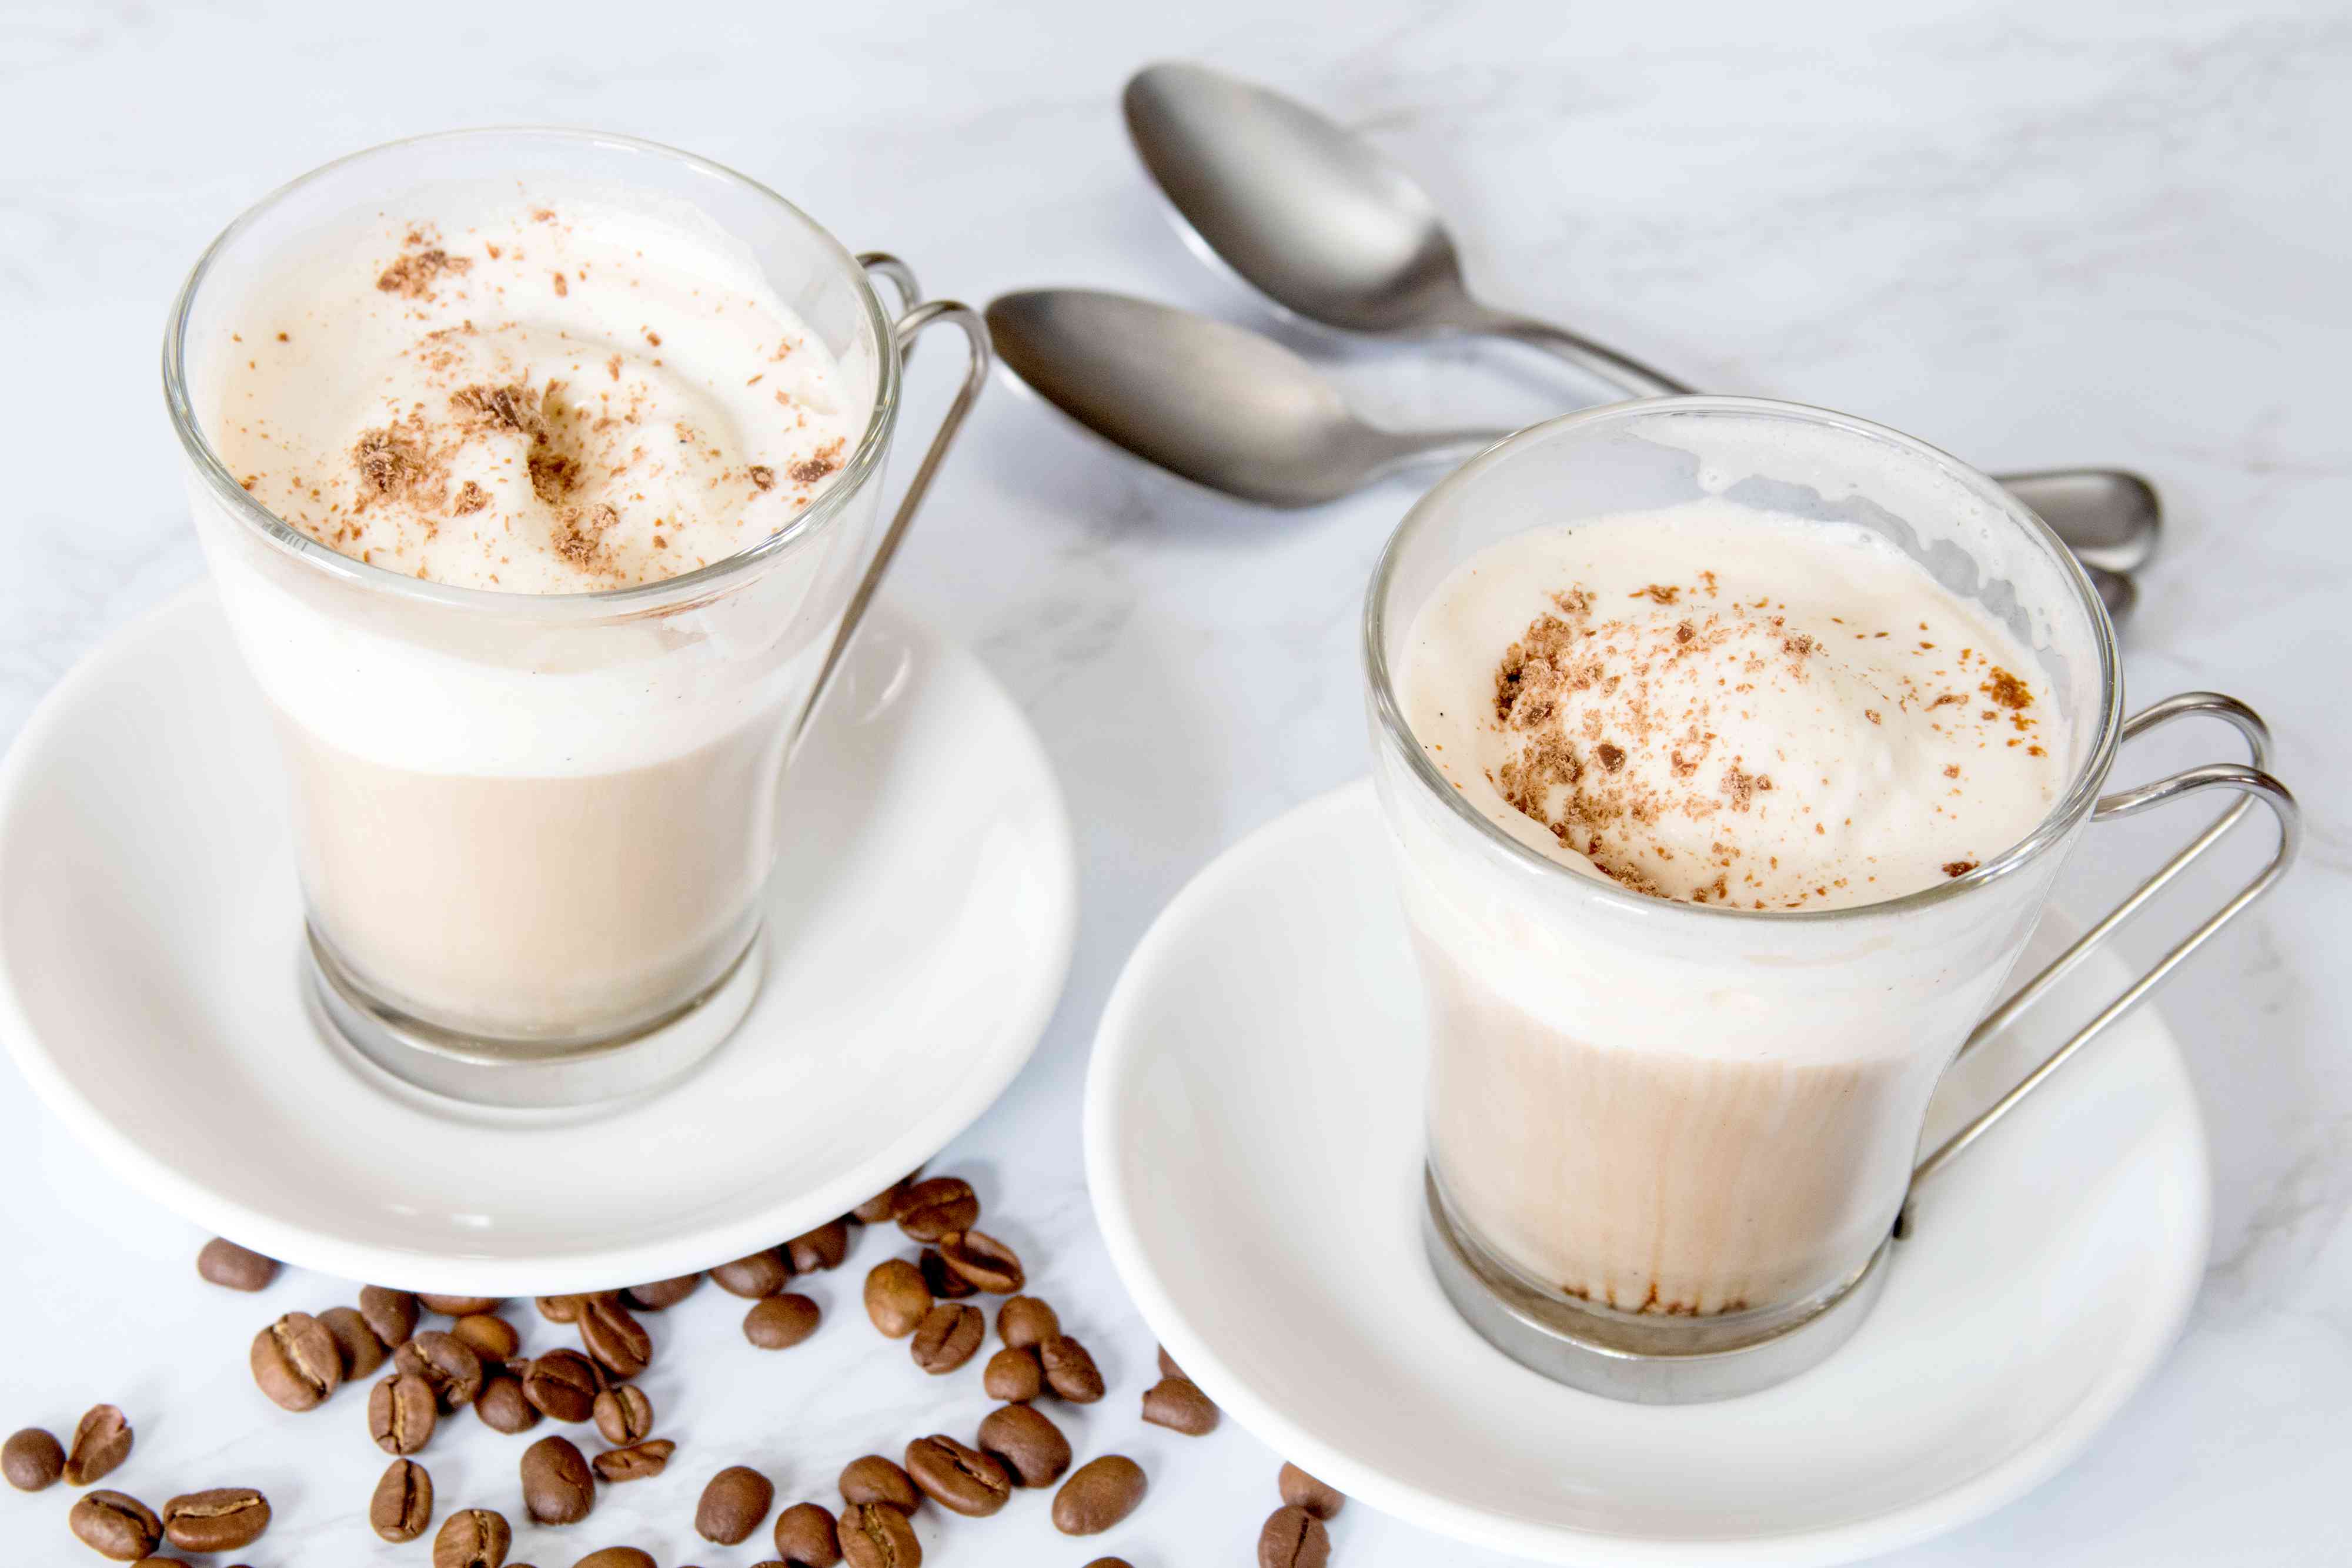 best-coffee-recipe-in-the-world-discover-6-world-famous-coffee-recipes